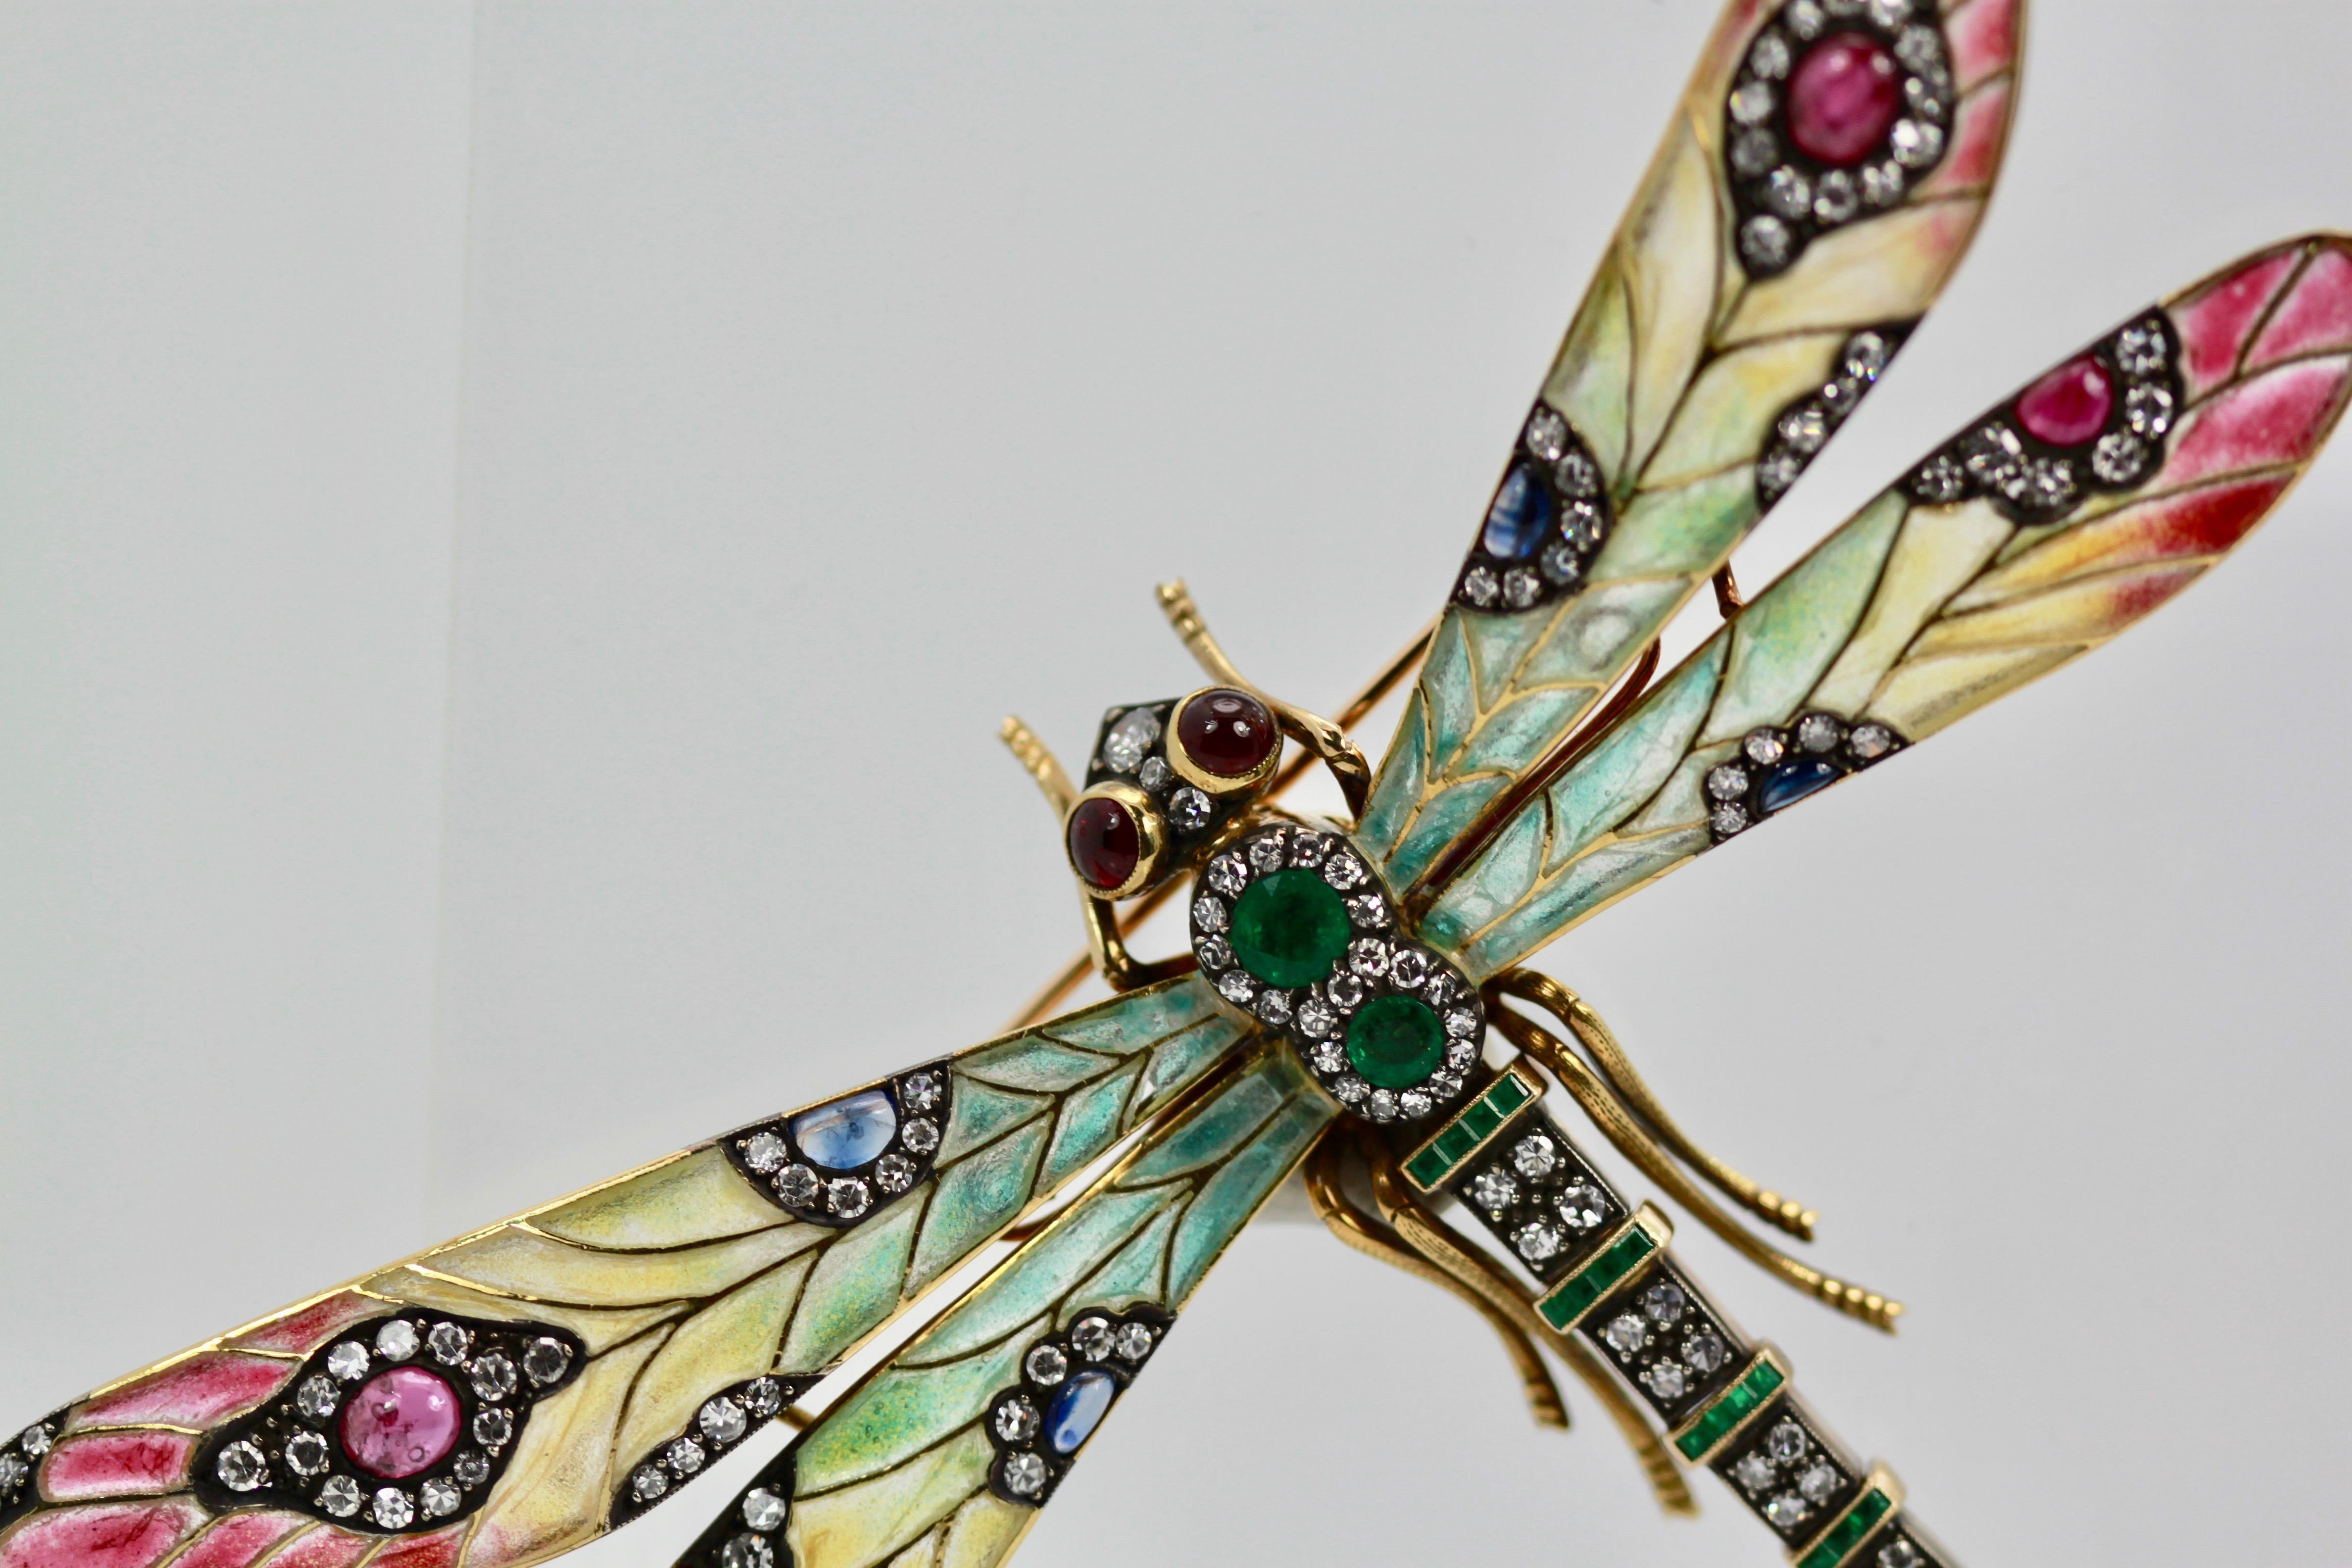 This Plique a Jour Dragonfly Brooch is spectacular and huge with wings and the body measuring 12cm x 8cm or almost 5